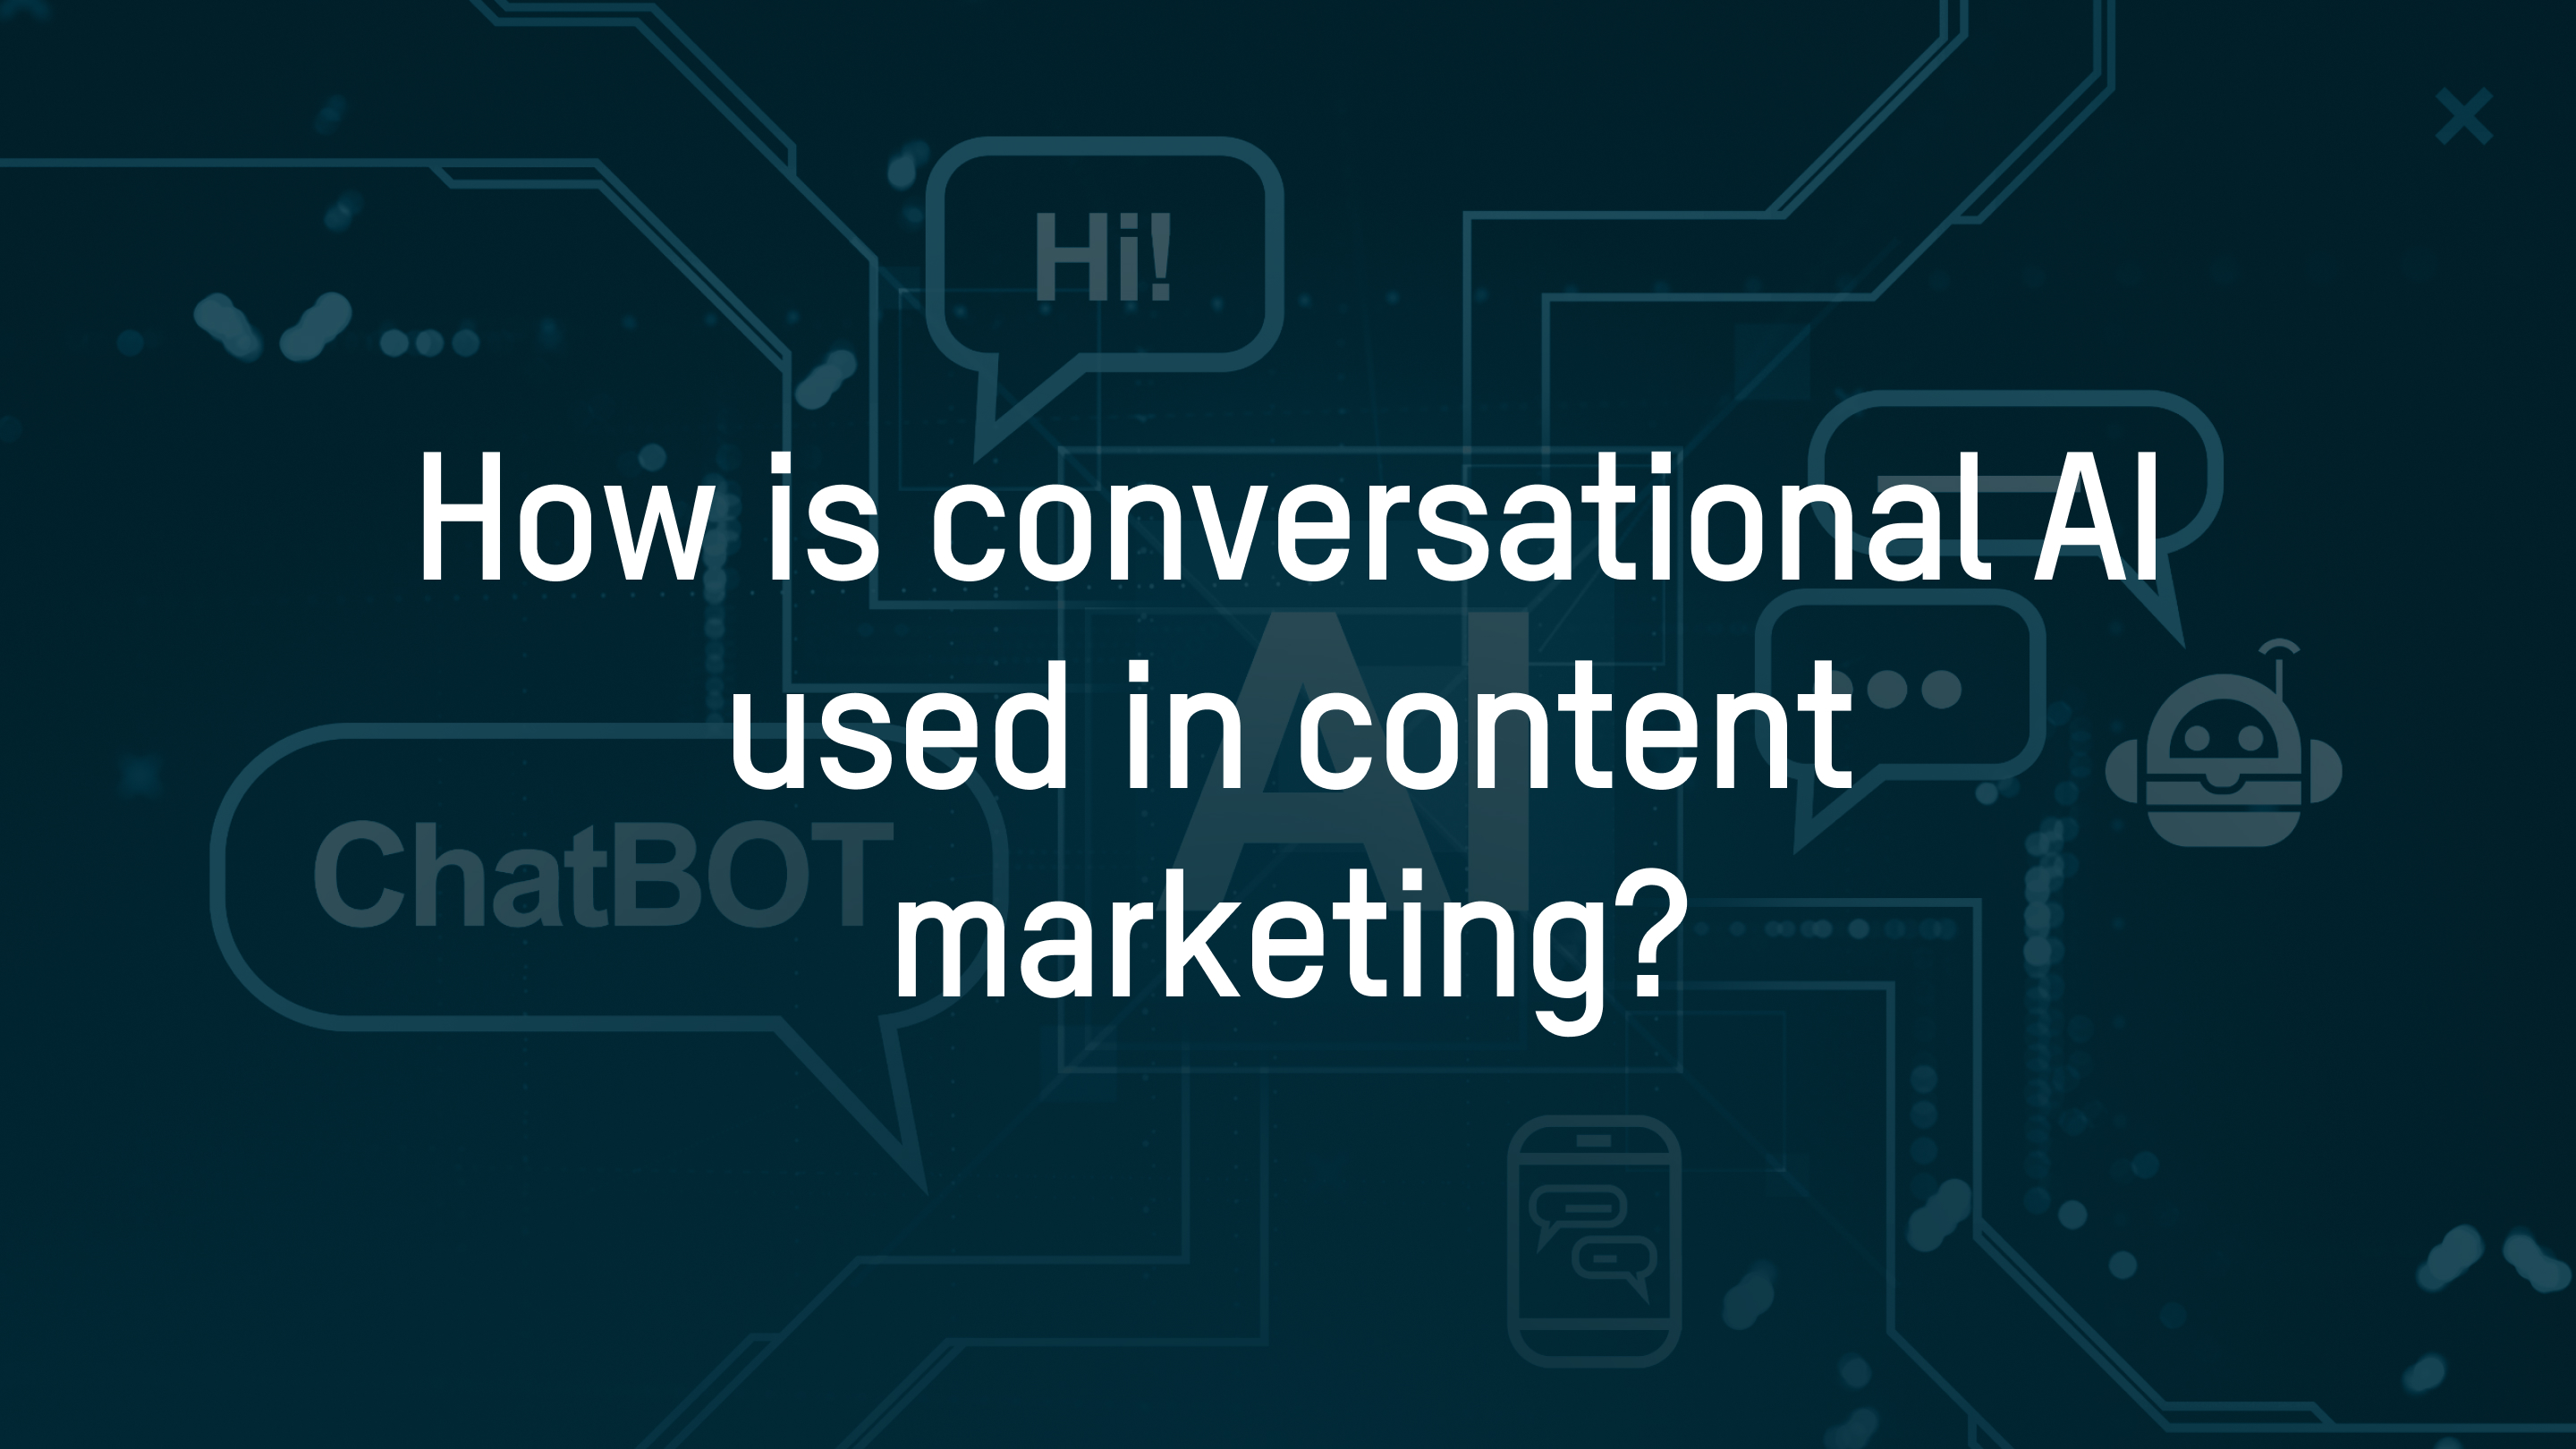 How is conversational AI used in content marketing?